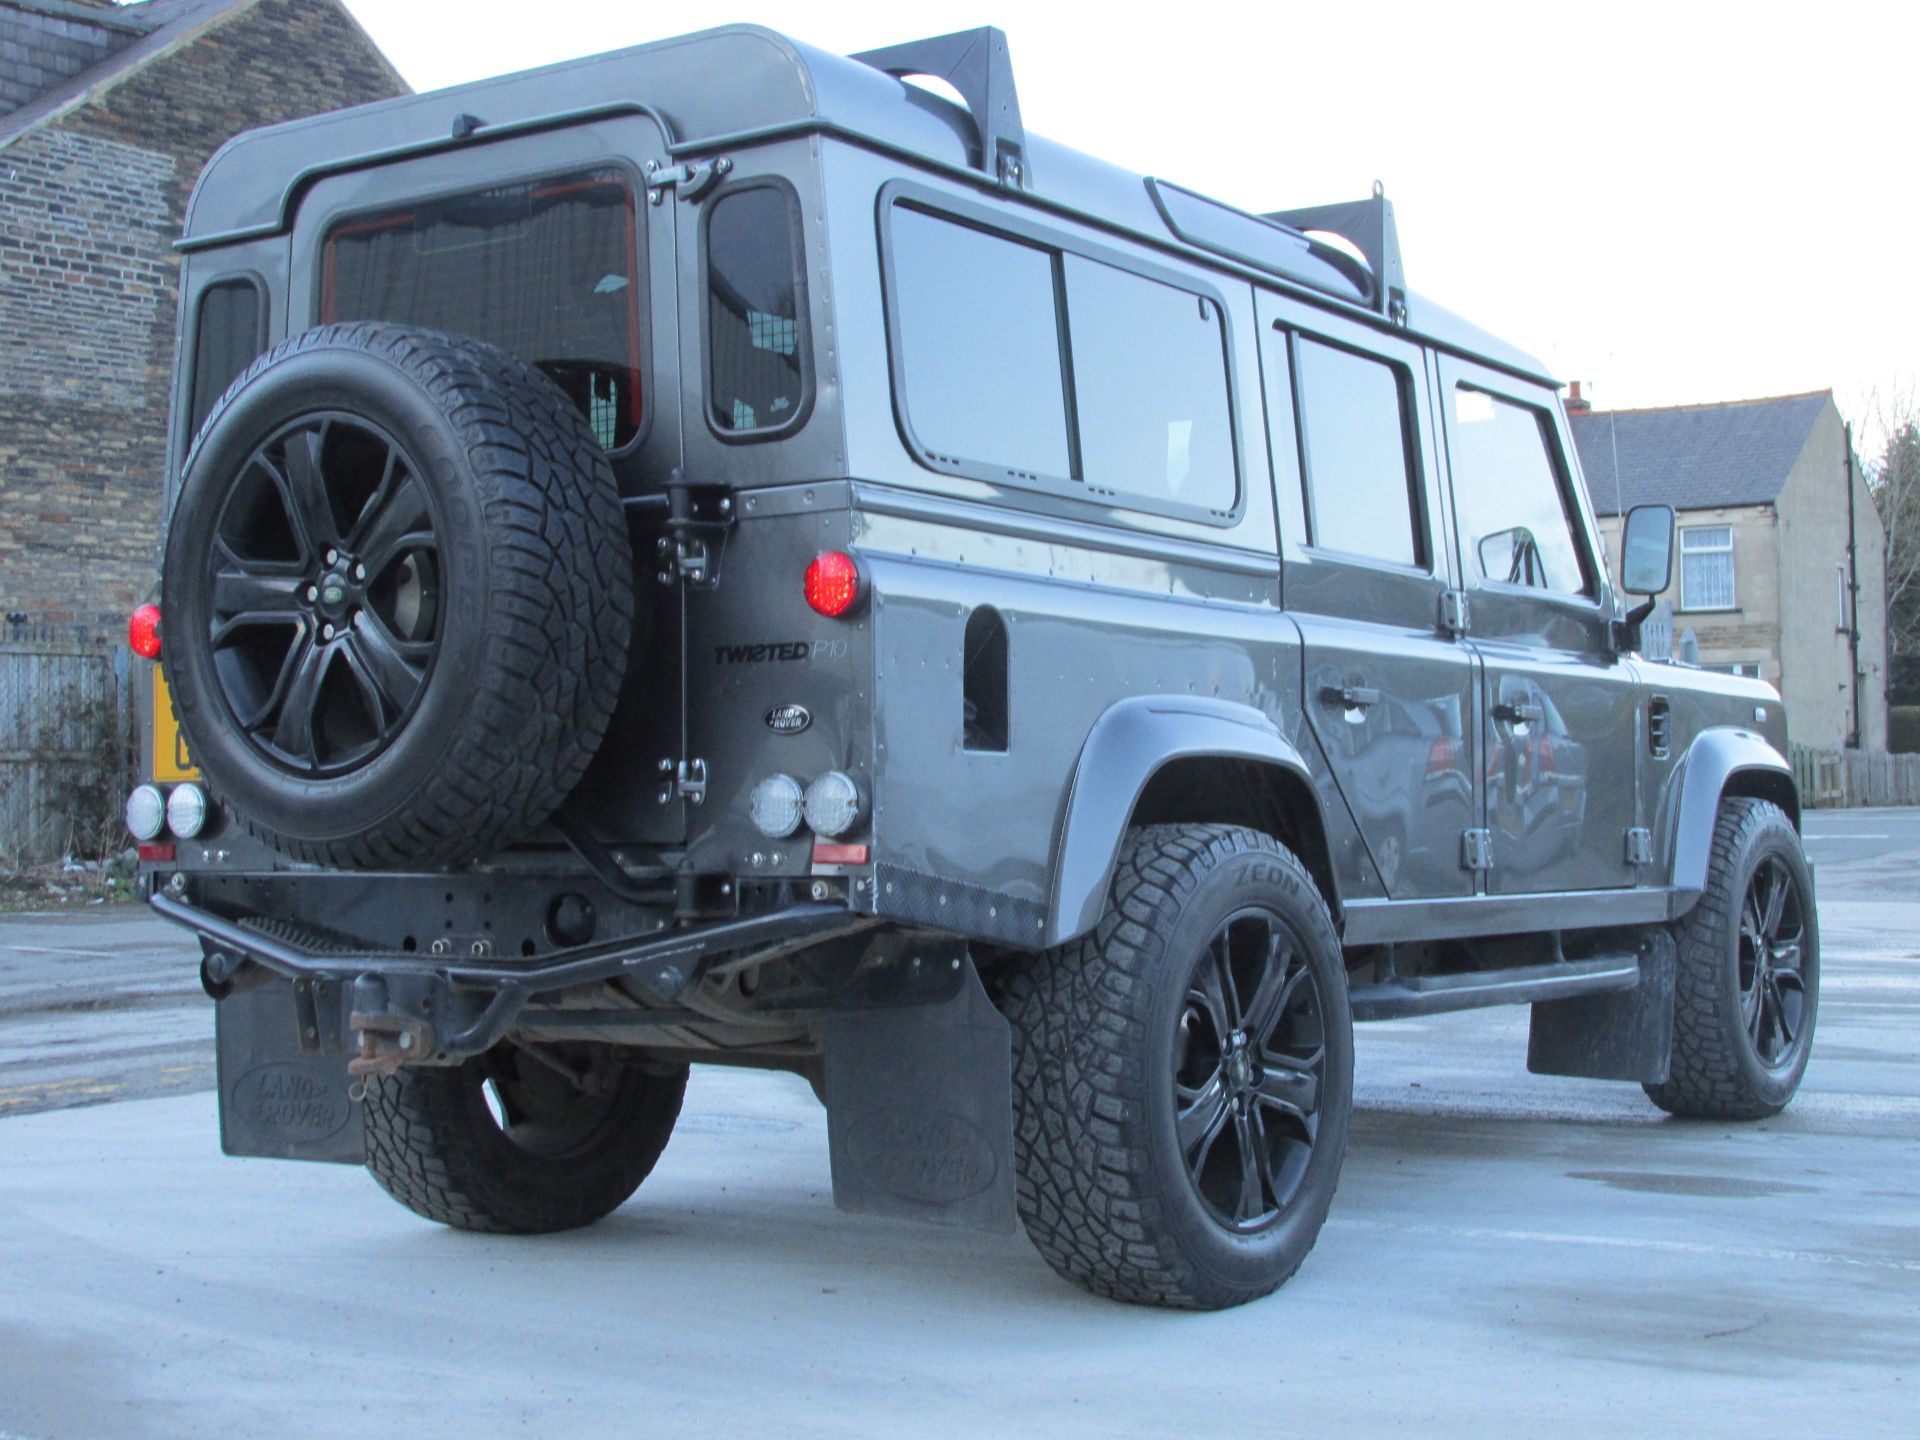 'TWISTED' - Rare Land Rover Defender Genuine PS 10 Built by Twisted Yorkshire - Image 4 of 50